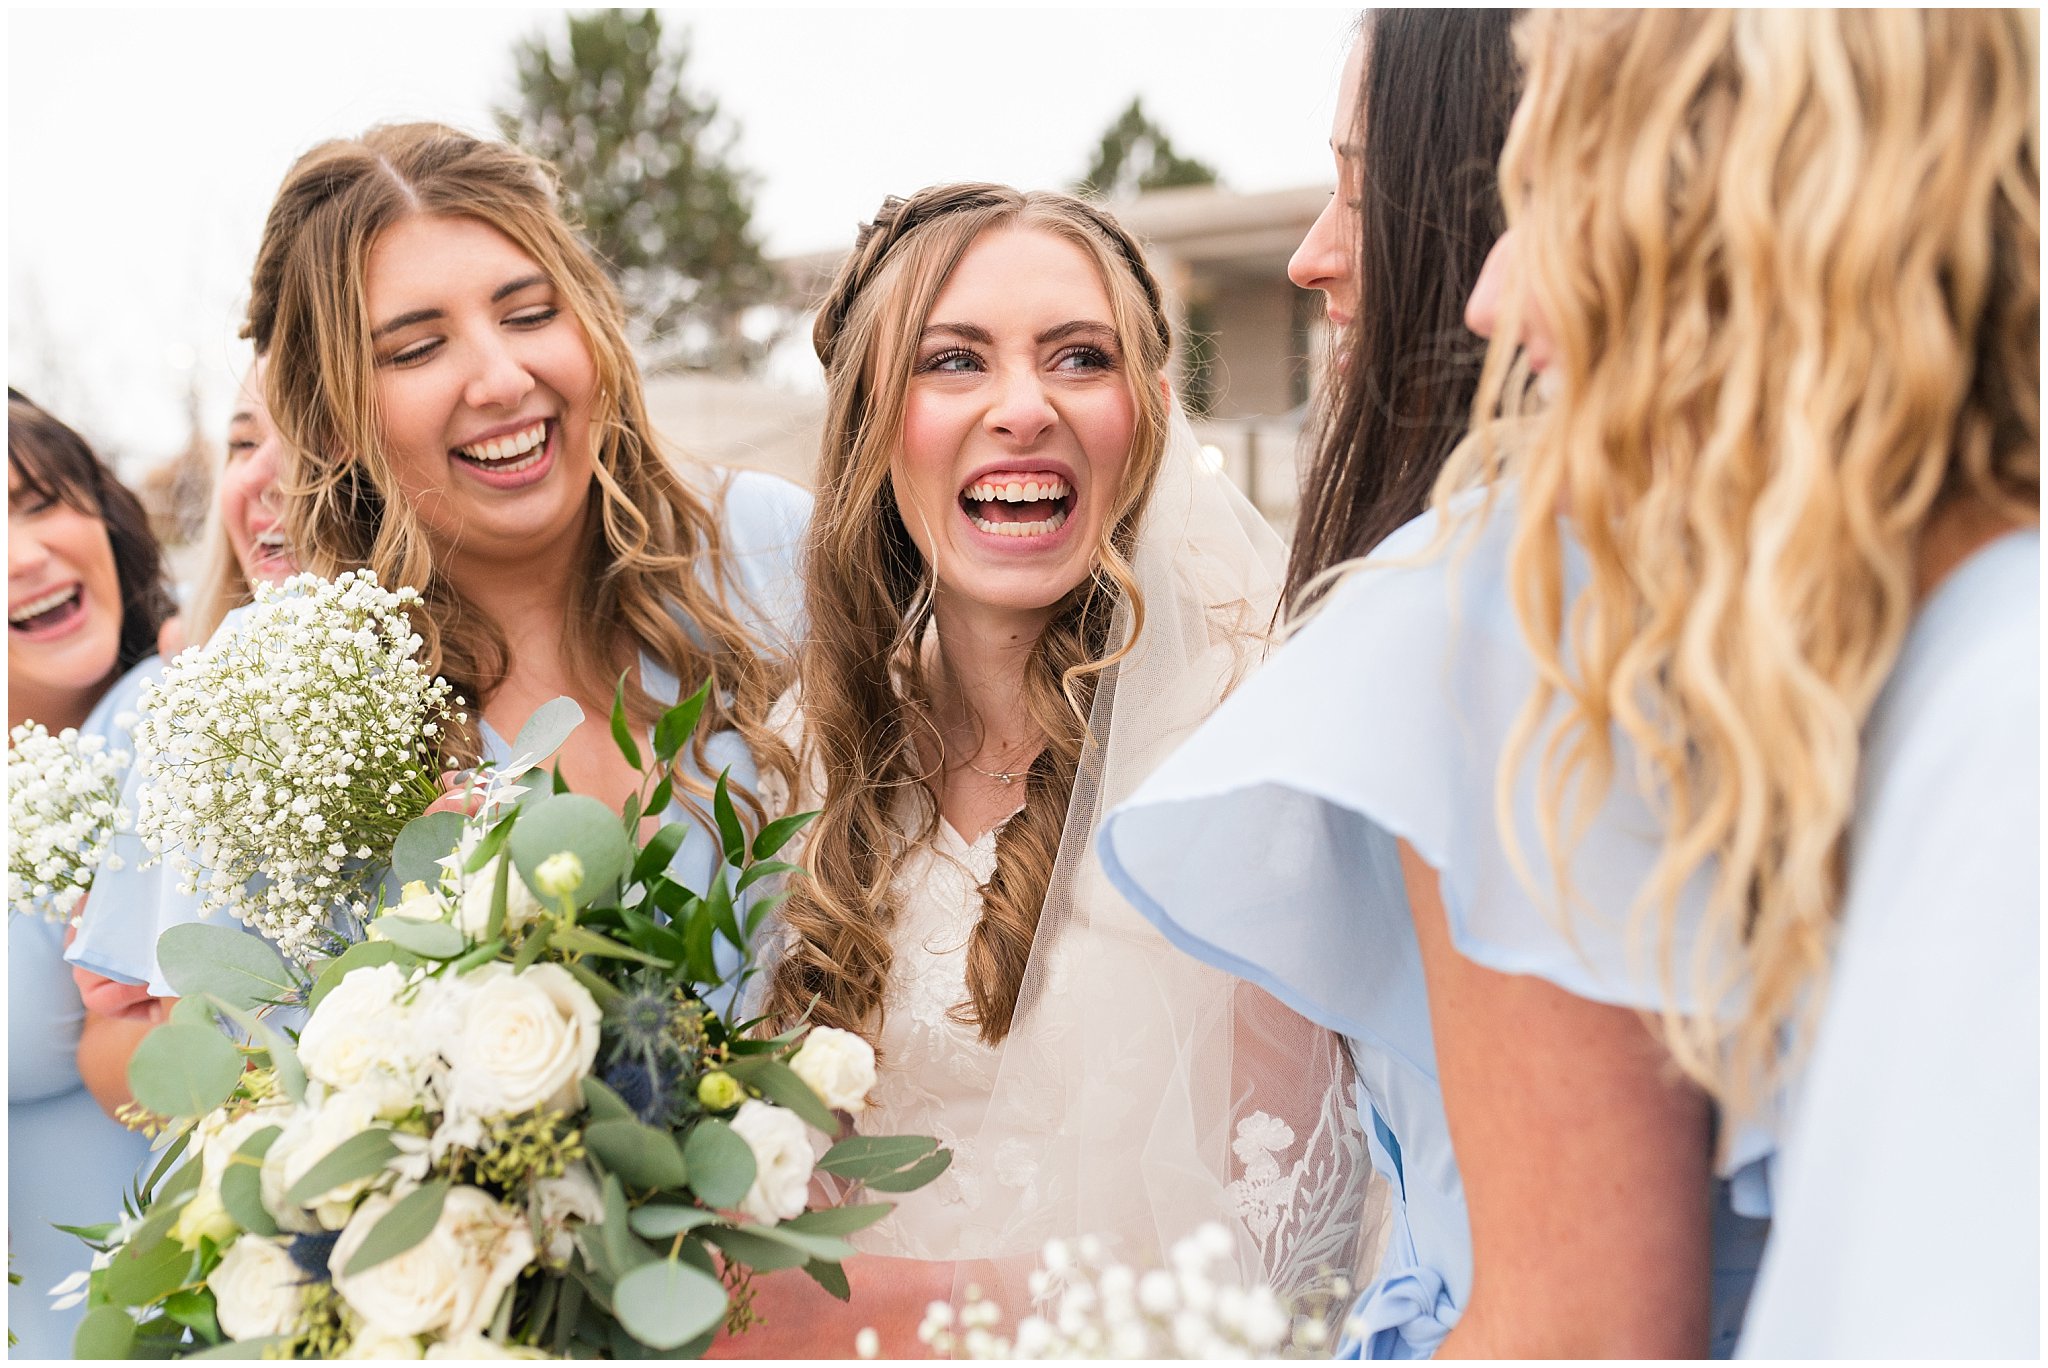 Bride with bridesmaids in light blue dresses with white bouquets | Oquirrh Mountain Temple and Draper Day Barn Winter Wedding | Jessie and Dallin Photography